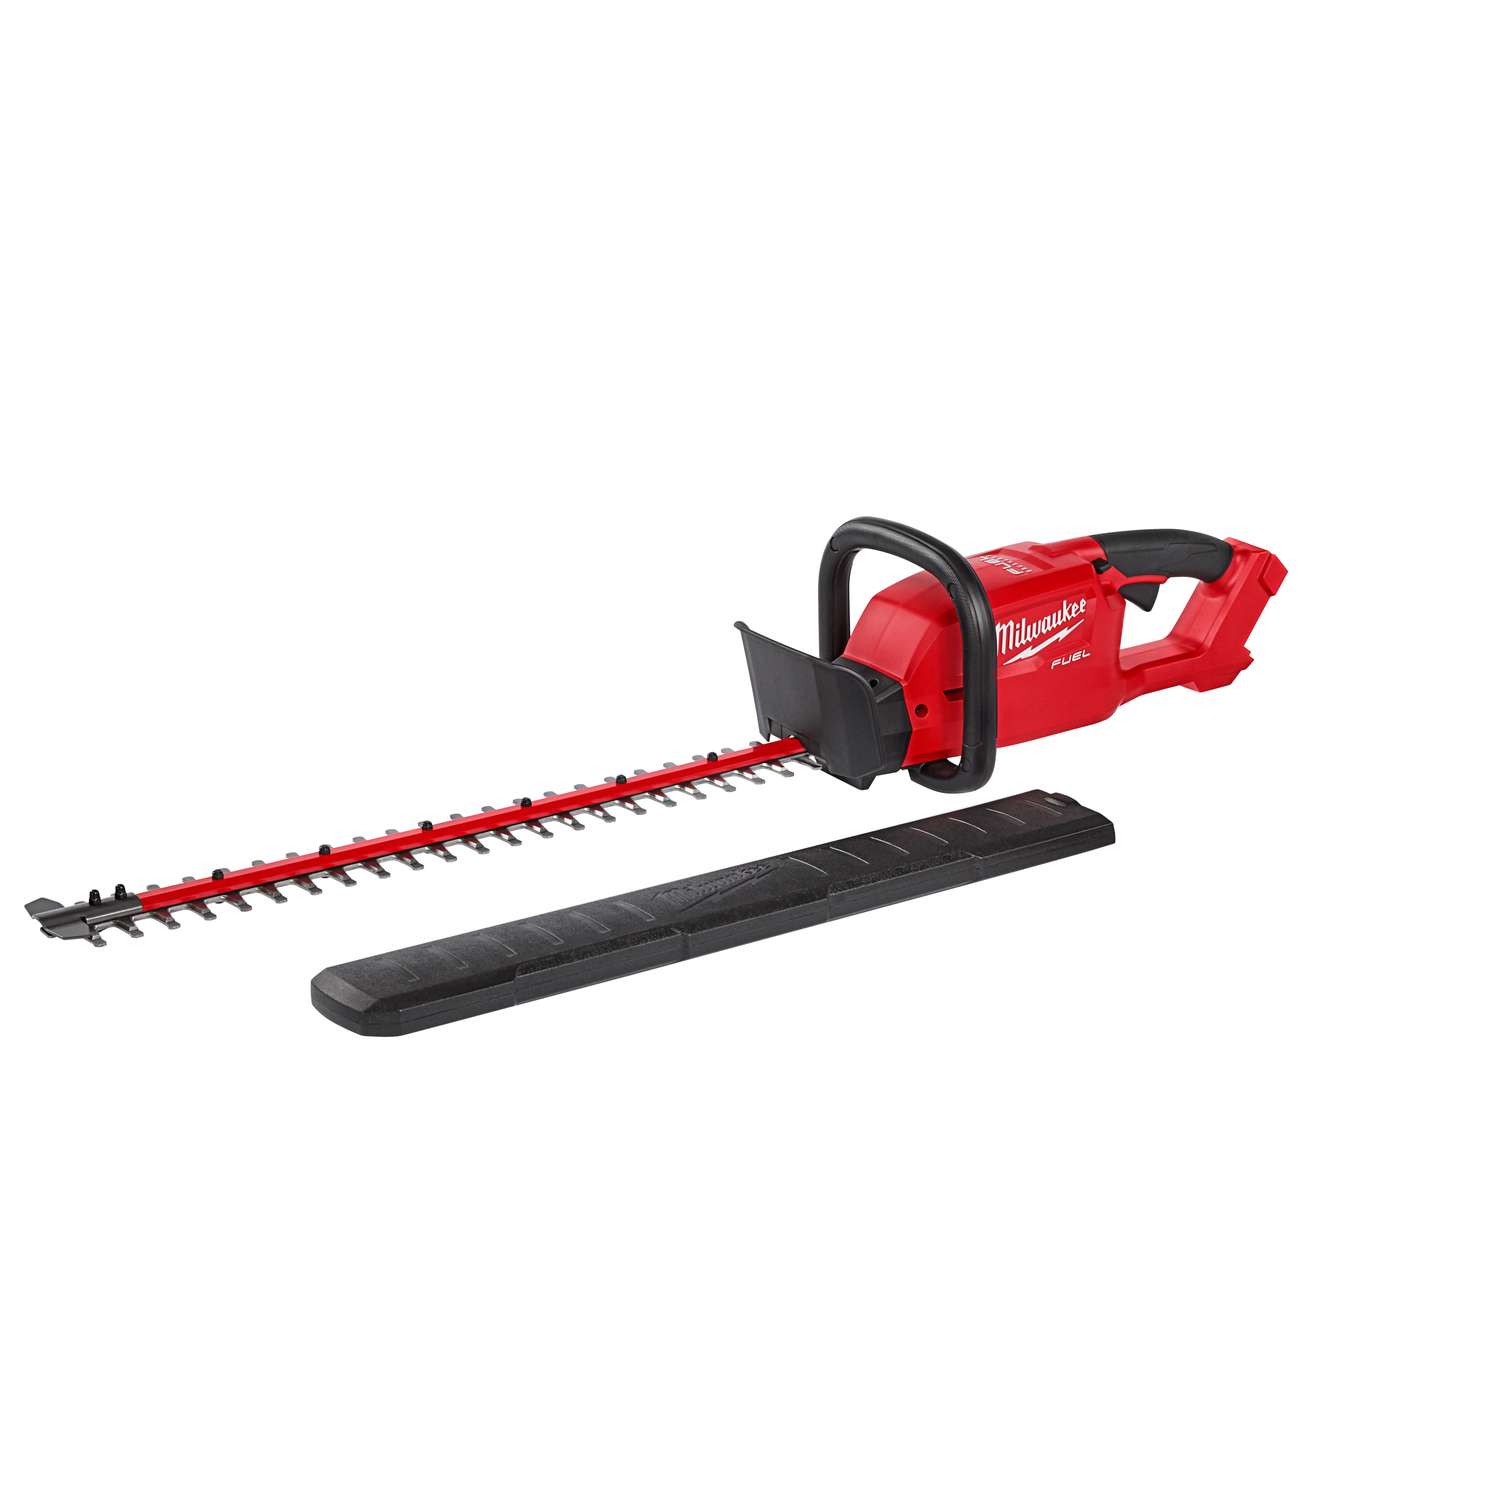 Milwaukee 24 in. 18 volt Battery Hedge Trimmer